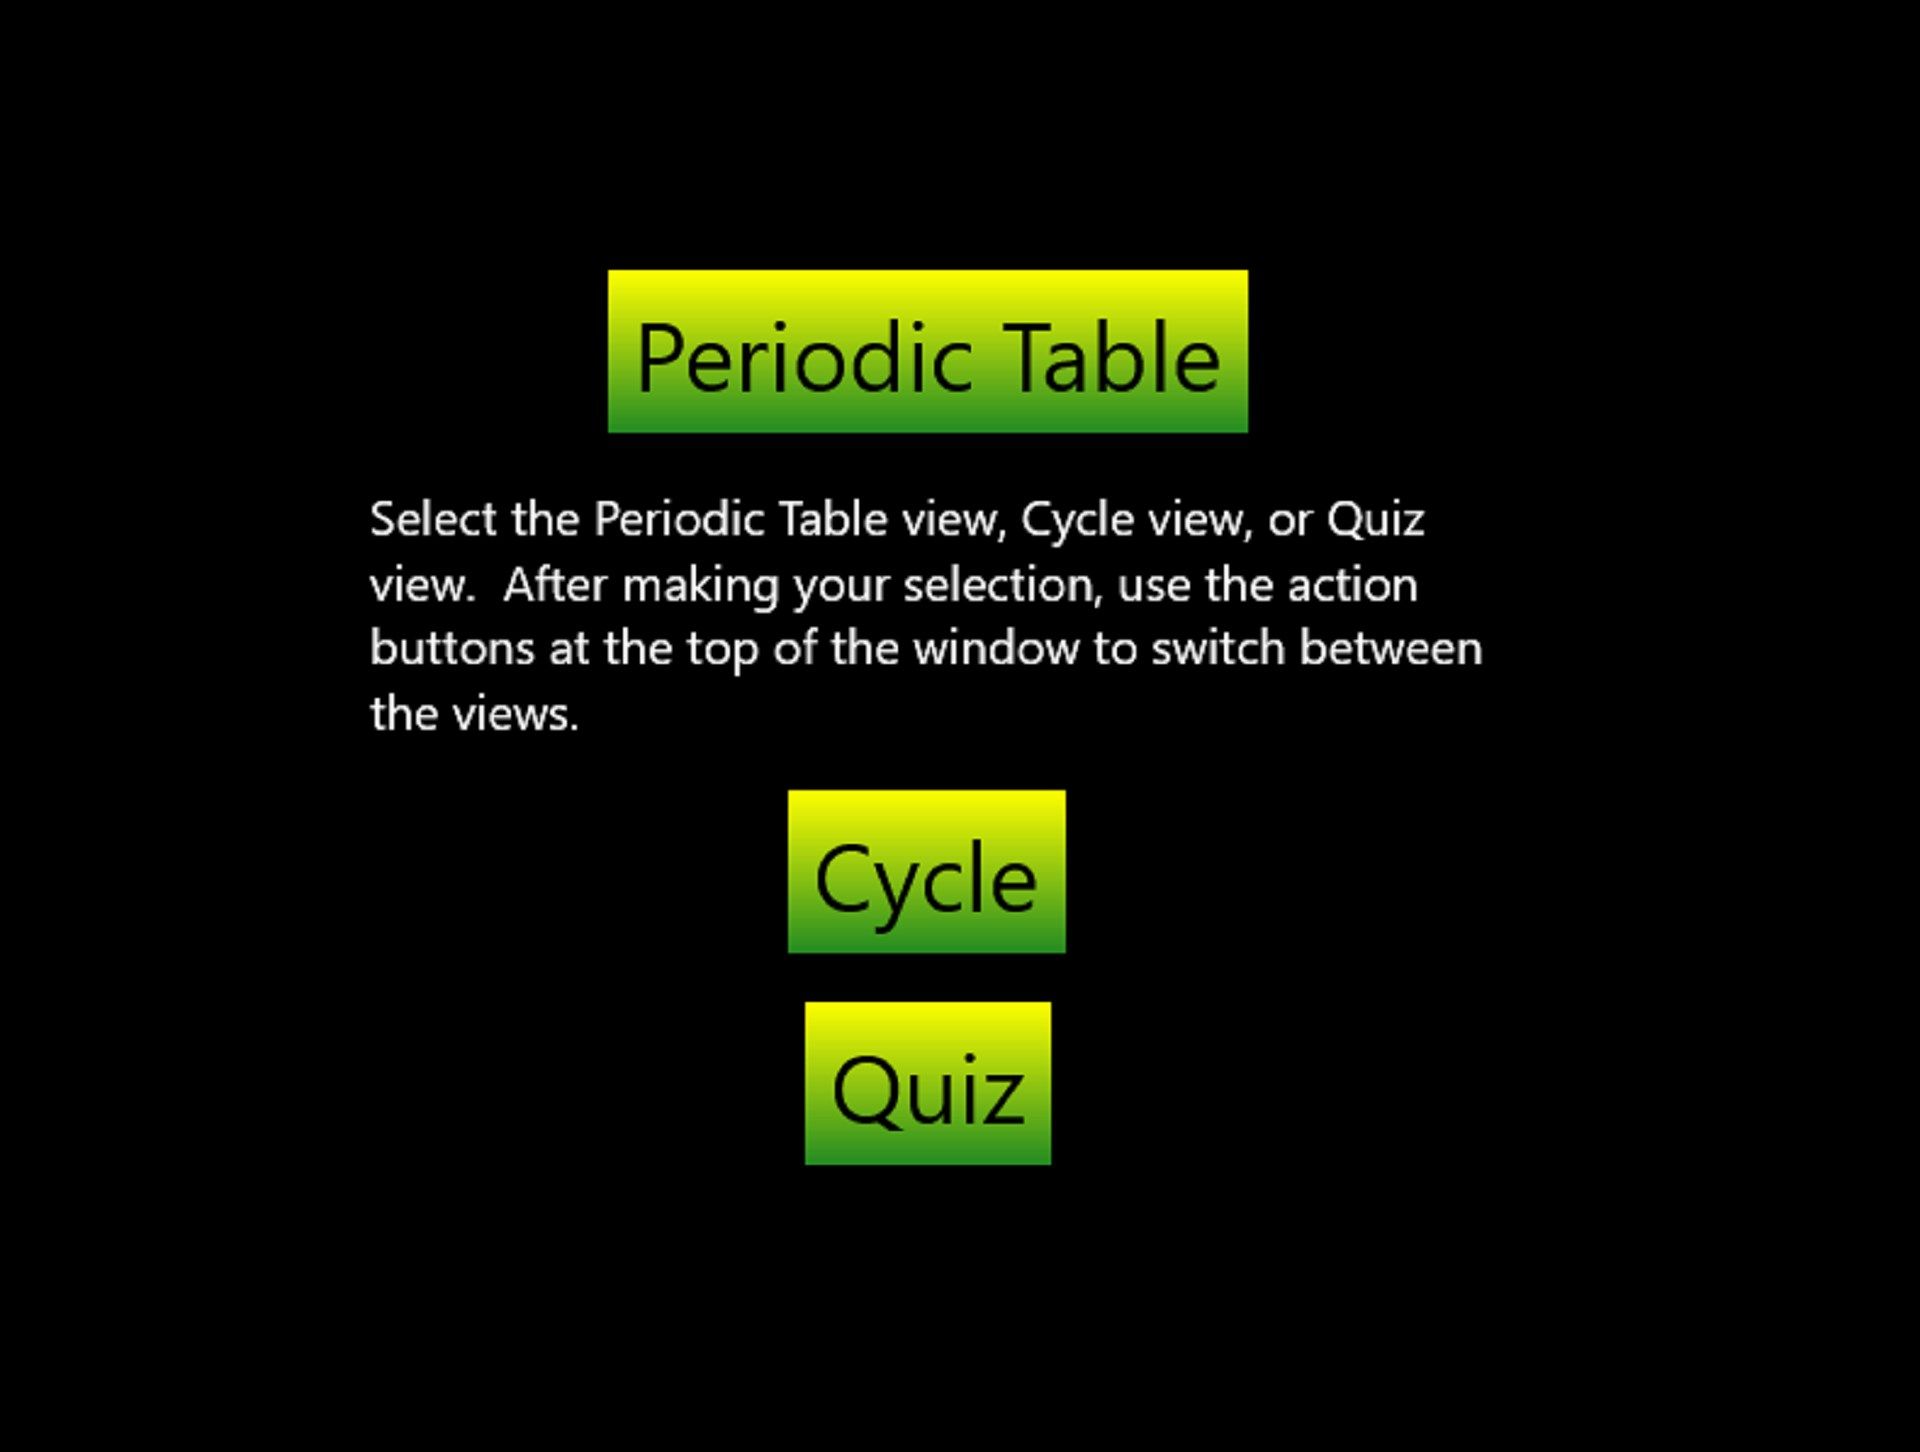 3E - Periodic Table Exercise - Ad Supported Version